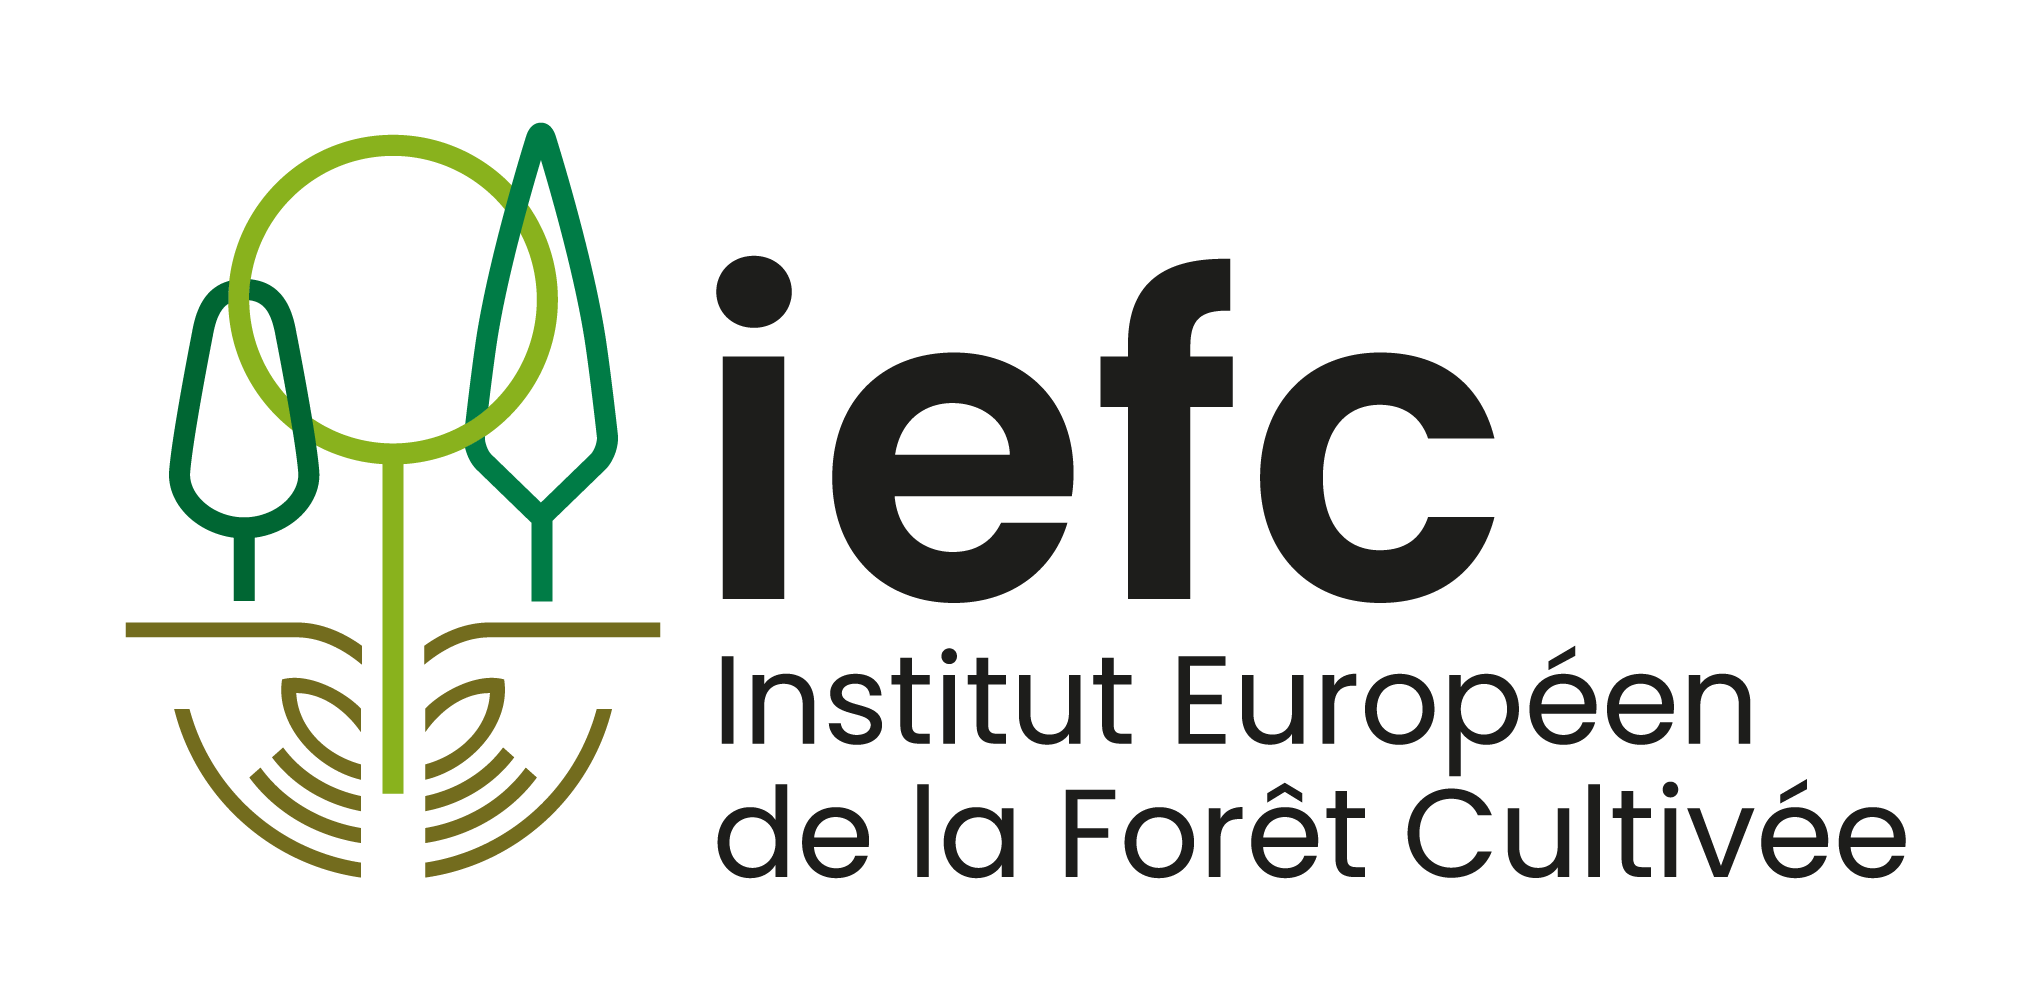 European Institute of Planted Forest (IEFC)